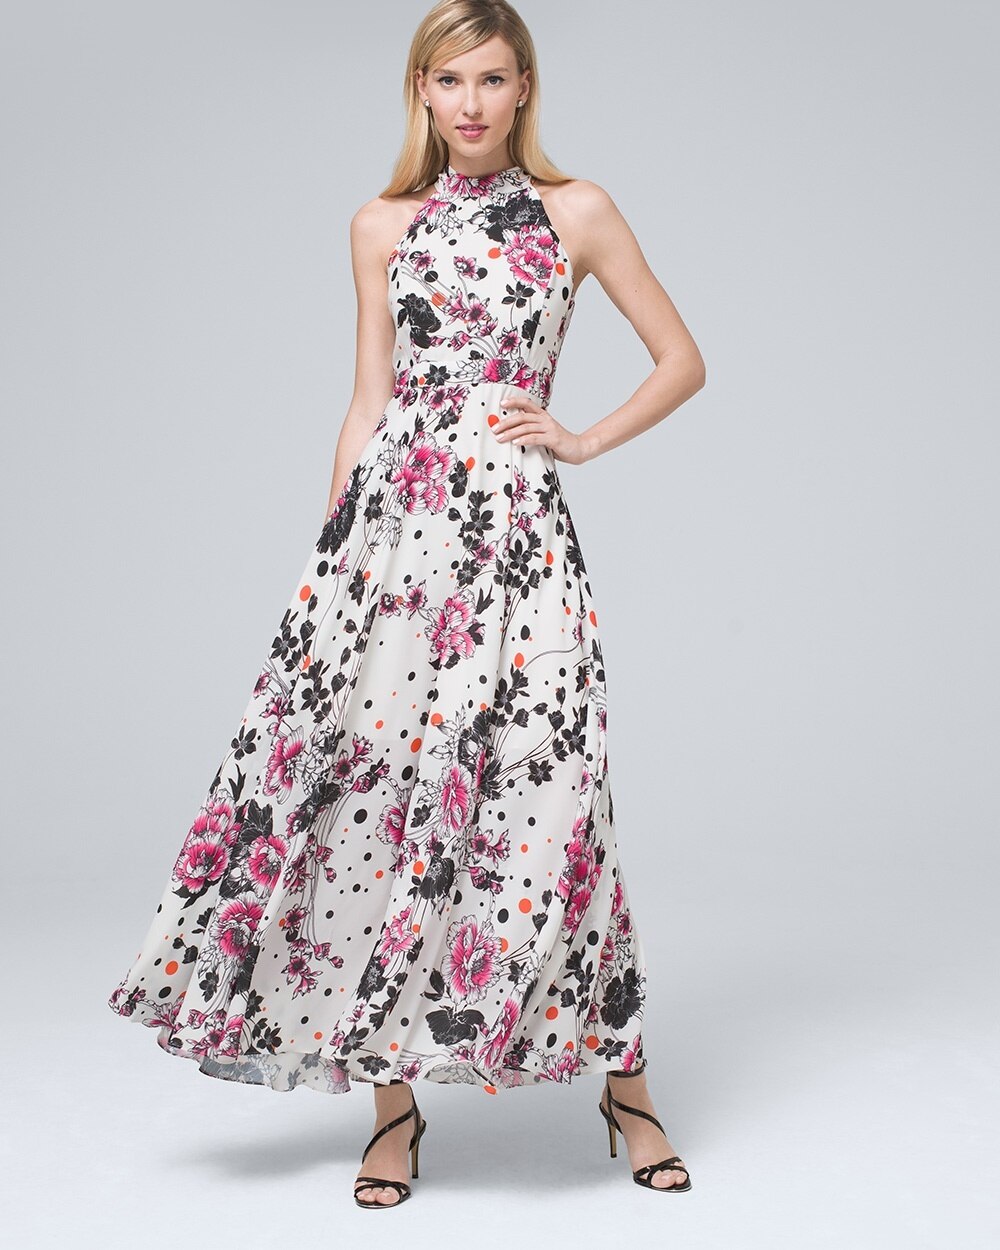 Nicole Miller New York Floral Maxi ...